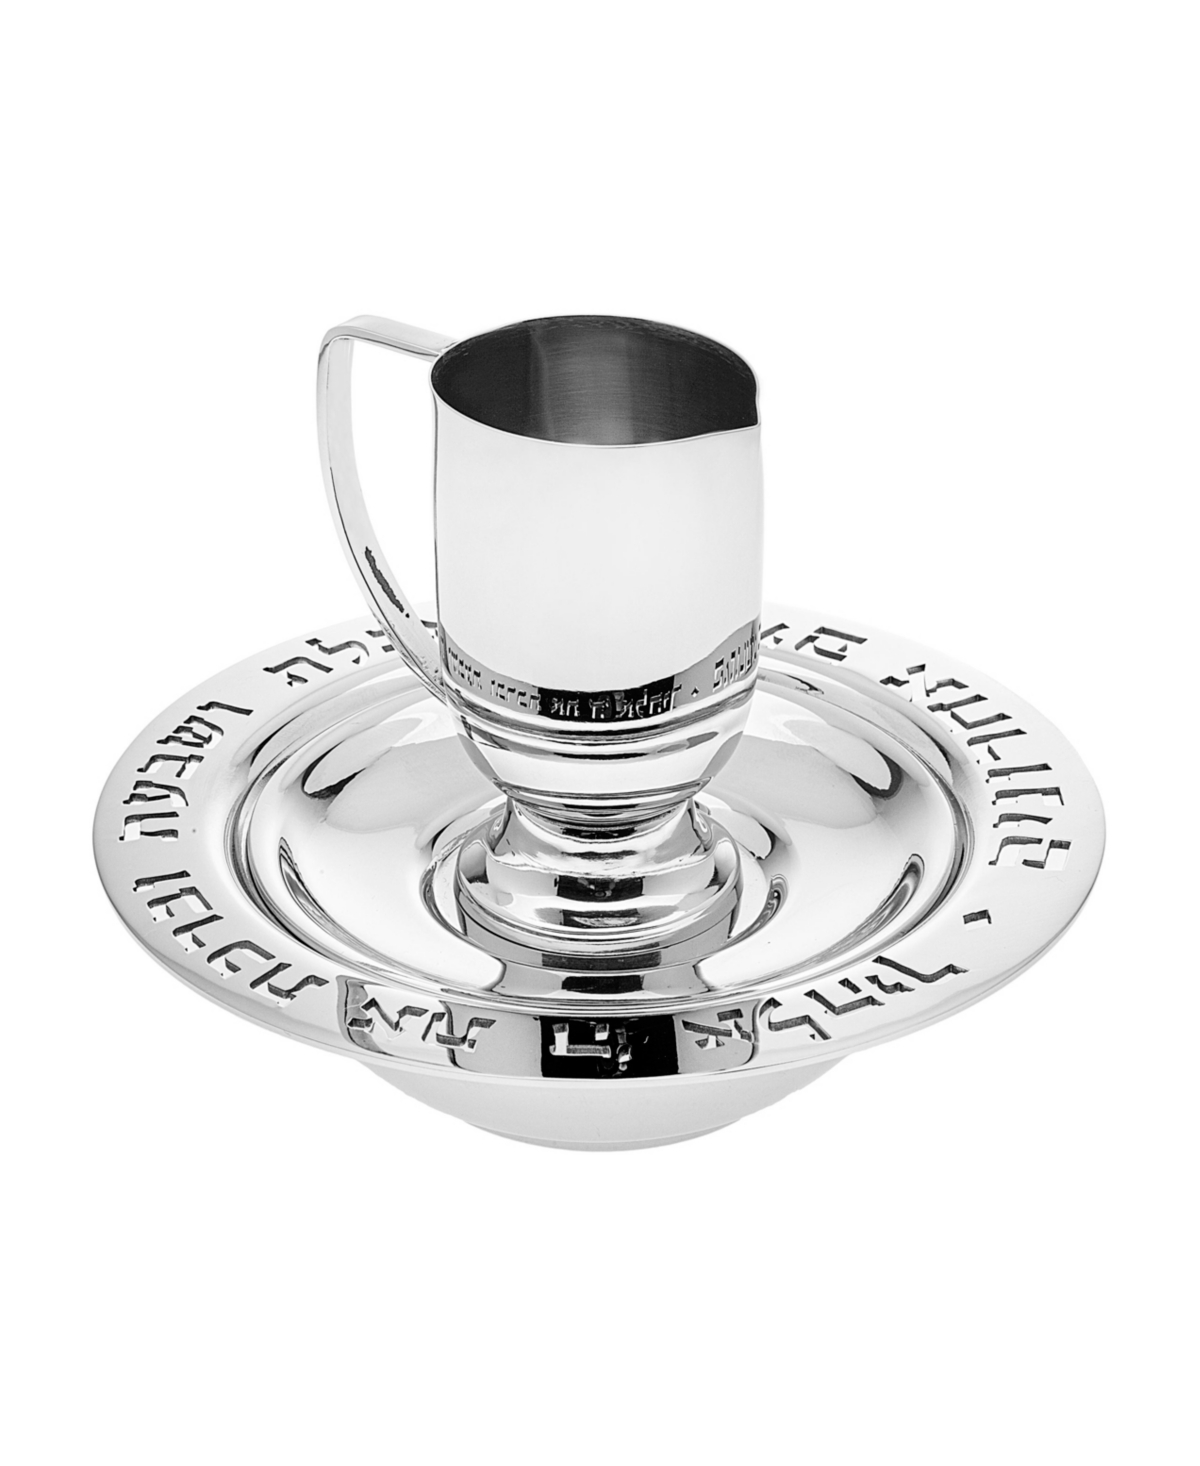 Godinger Wash Cup On Round Tainless Tray In Silver